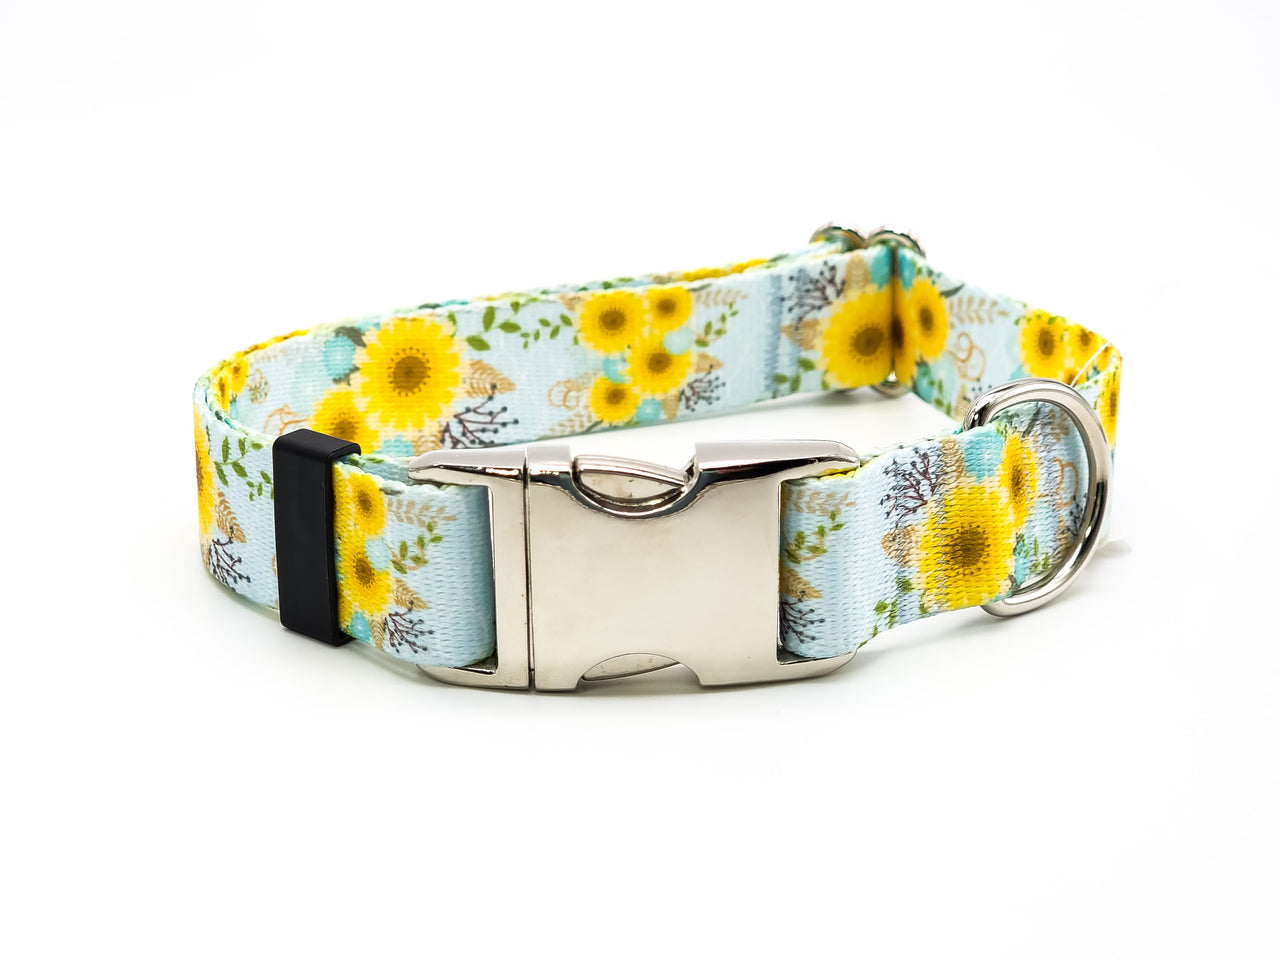 Sunny Days | Flat Side Release Collar | Large 14"-23" in 1" wide